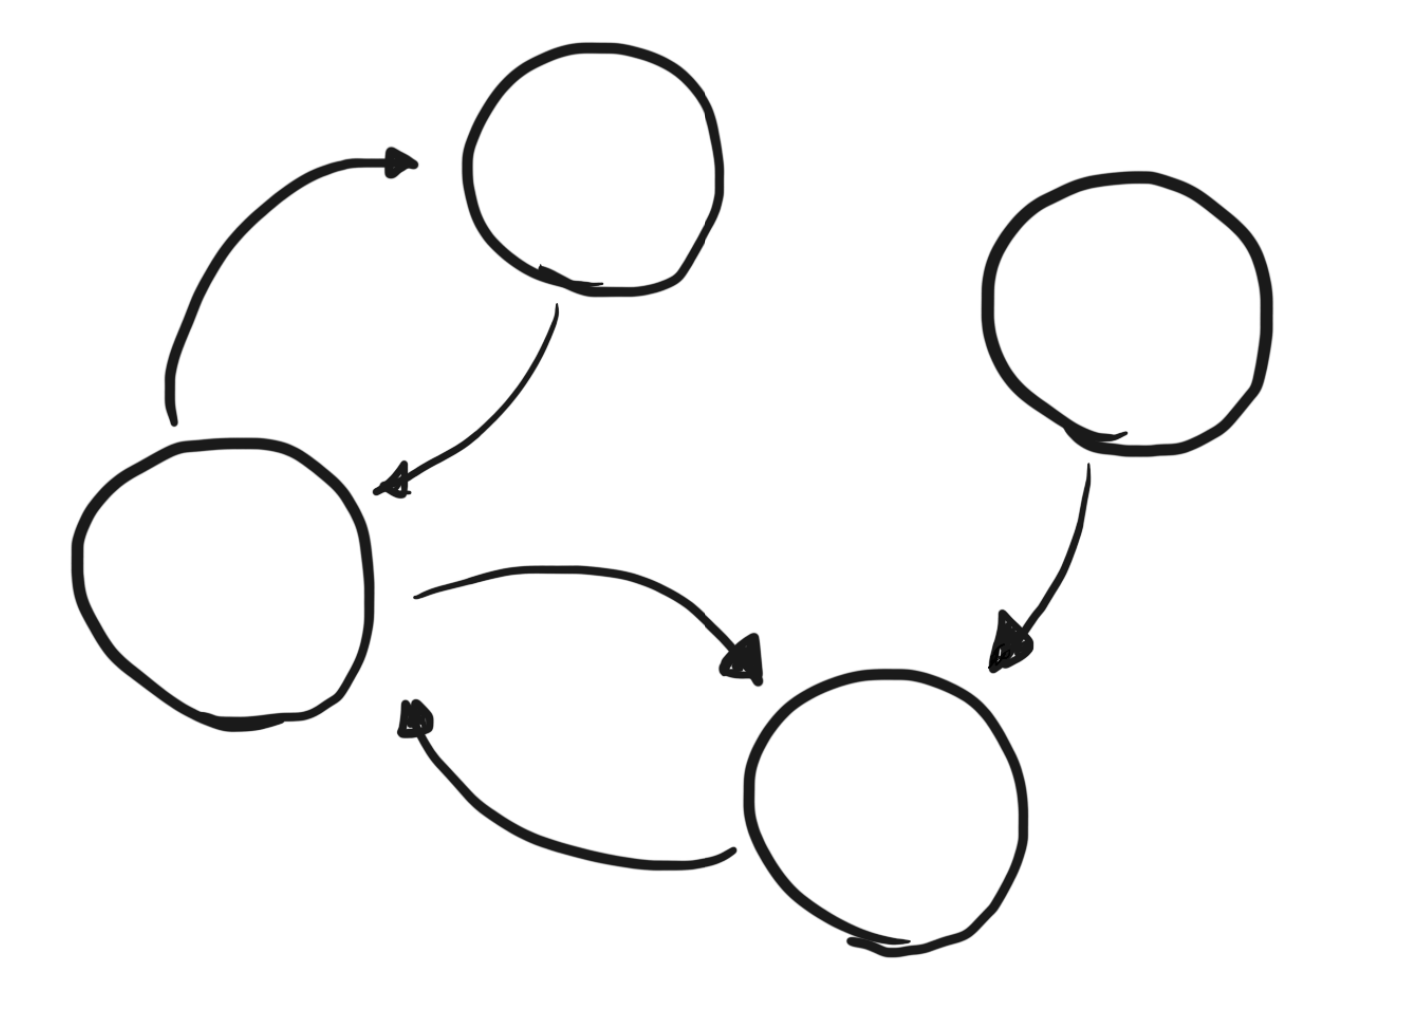 Example dependency graph without let/in expressions.